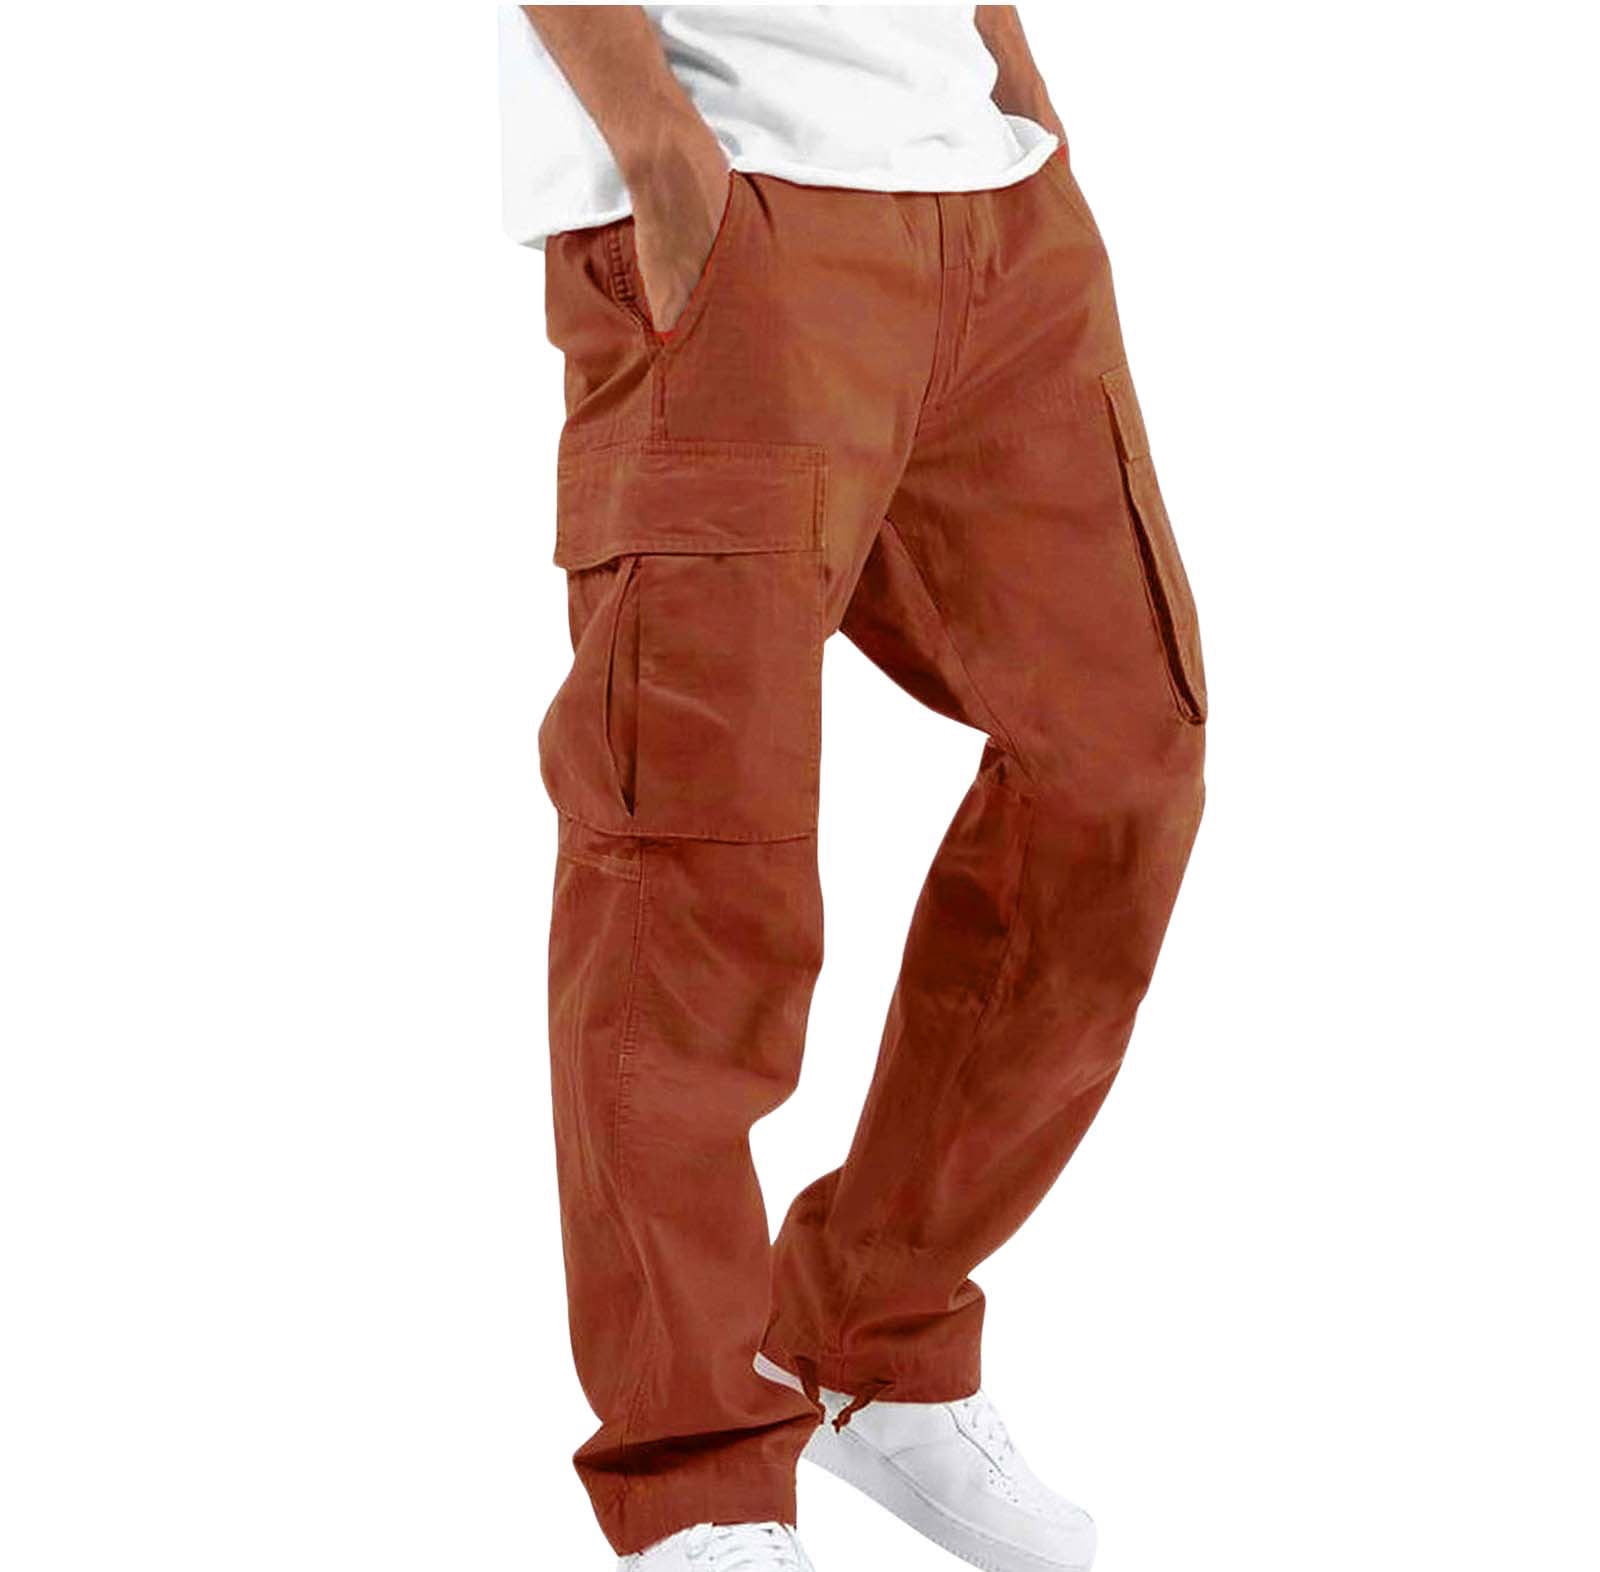 Fesfesfes Clearance Pants for Men Solid Color Casual Multiple Pockets Cargo  Pants Outdoor Straight Fitness Pants Cargo Pants Trousers